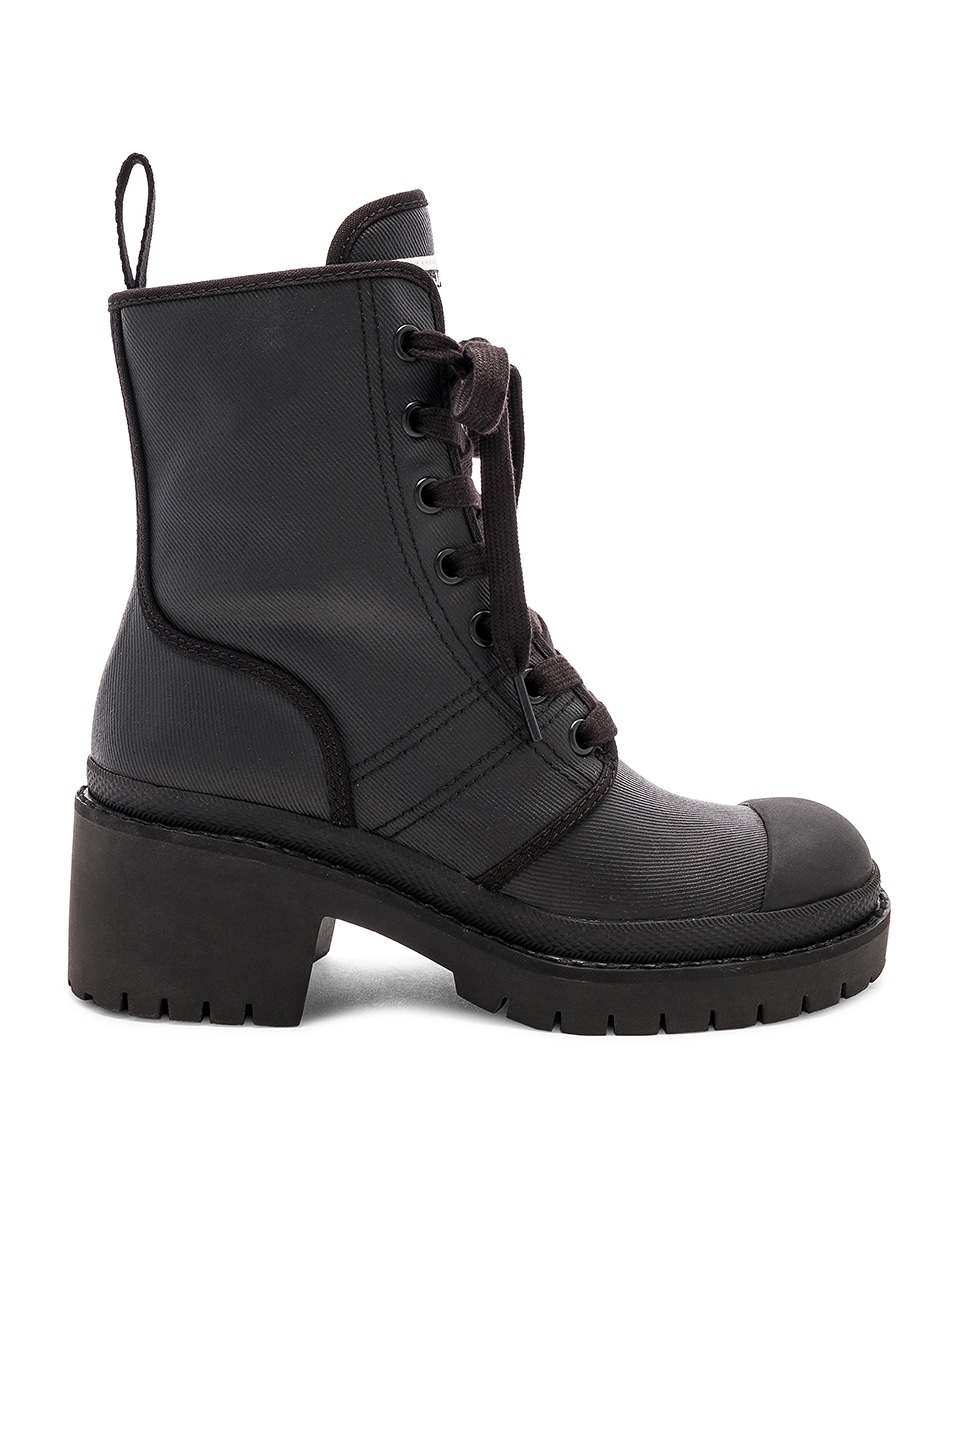 bristol lace up boot